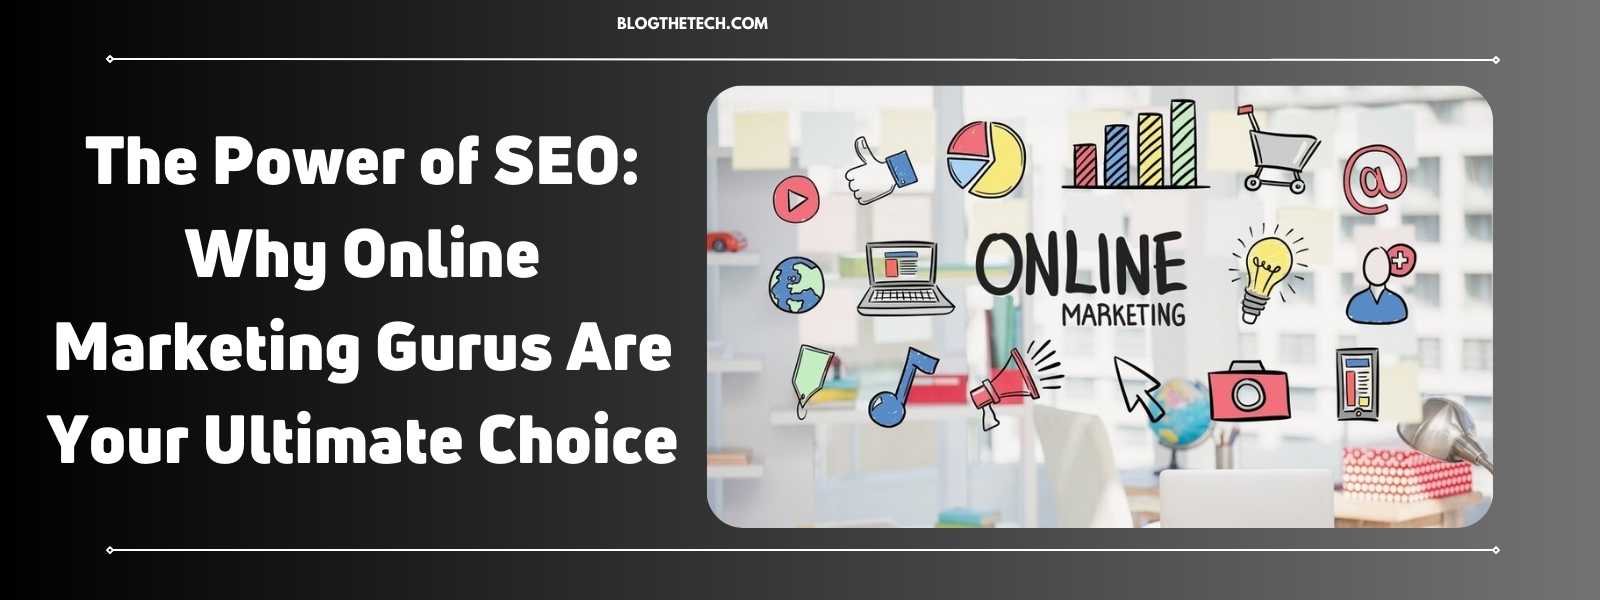 The Power of SEO - Why Online Marketing Gurus Are Your Ultimate Choice